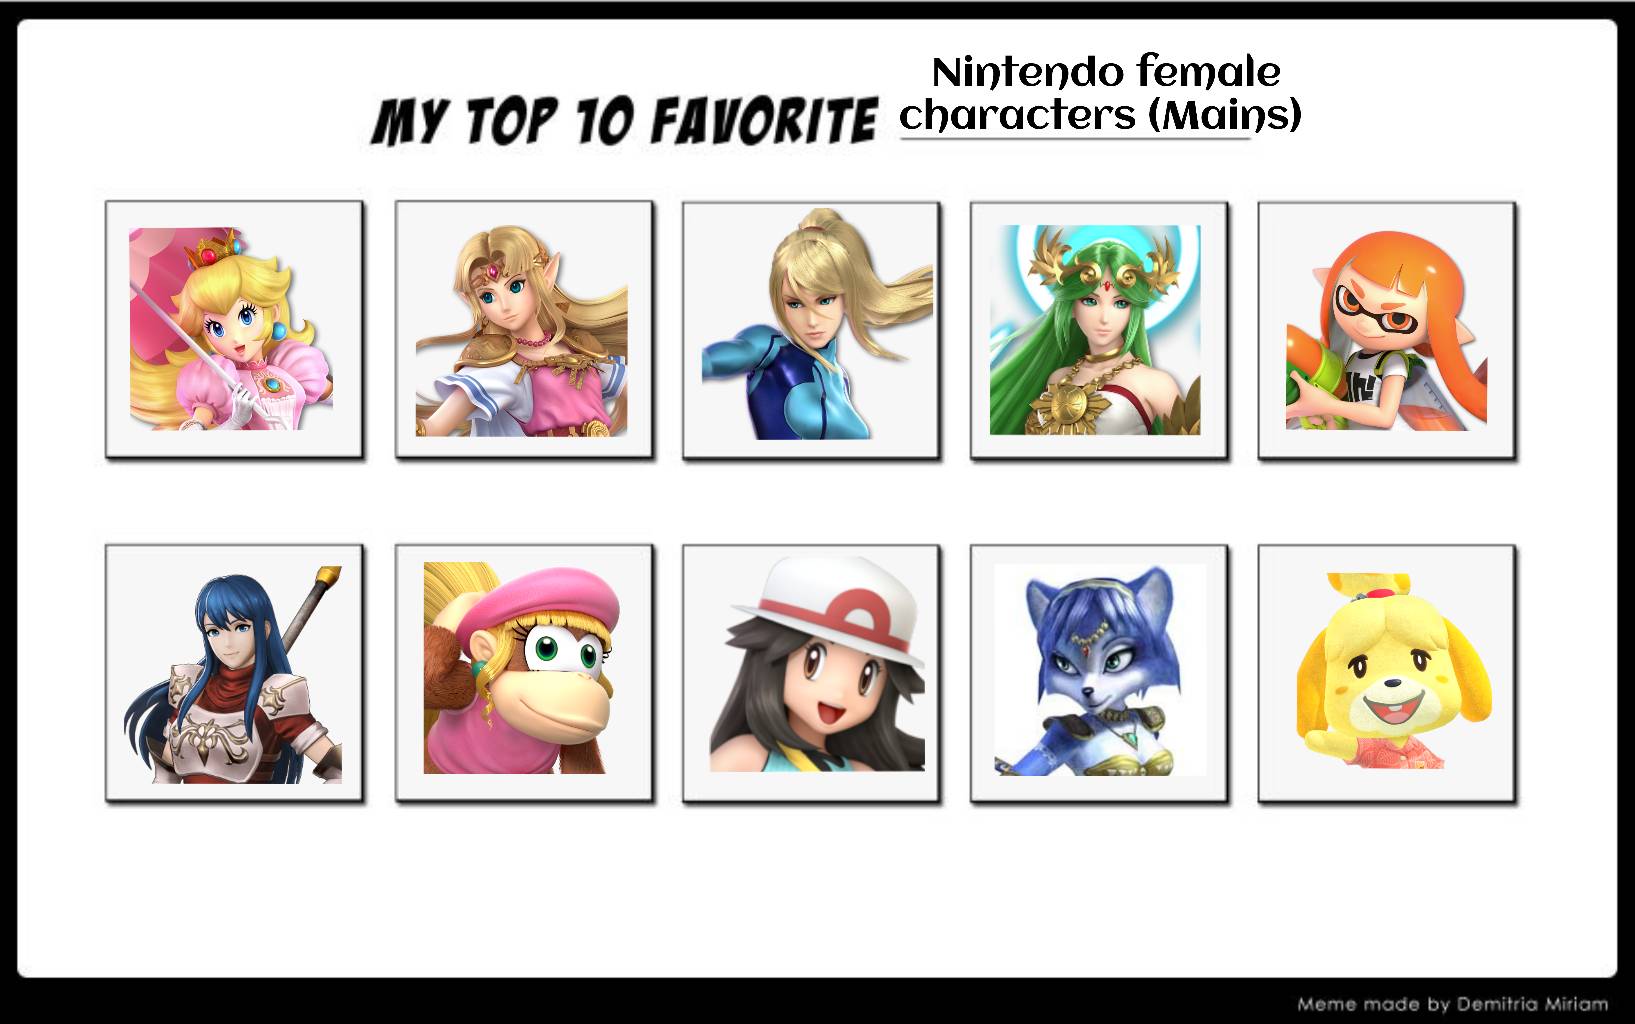 Top 10 favorite Nintendo female characters by Marielx6